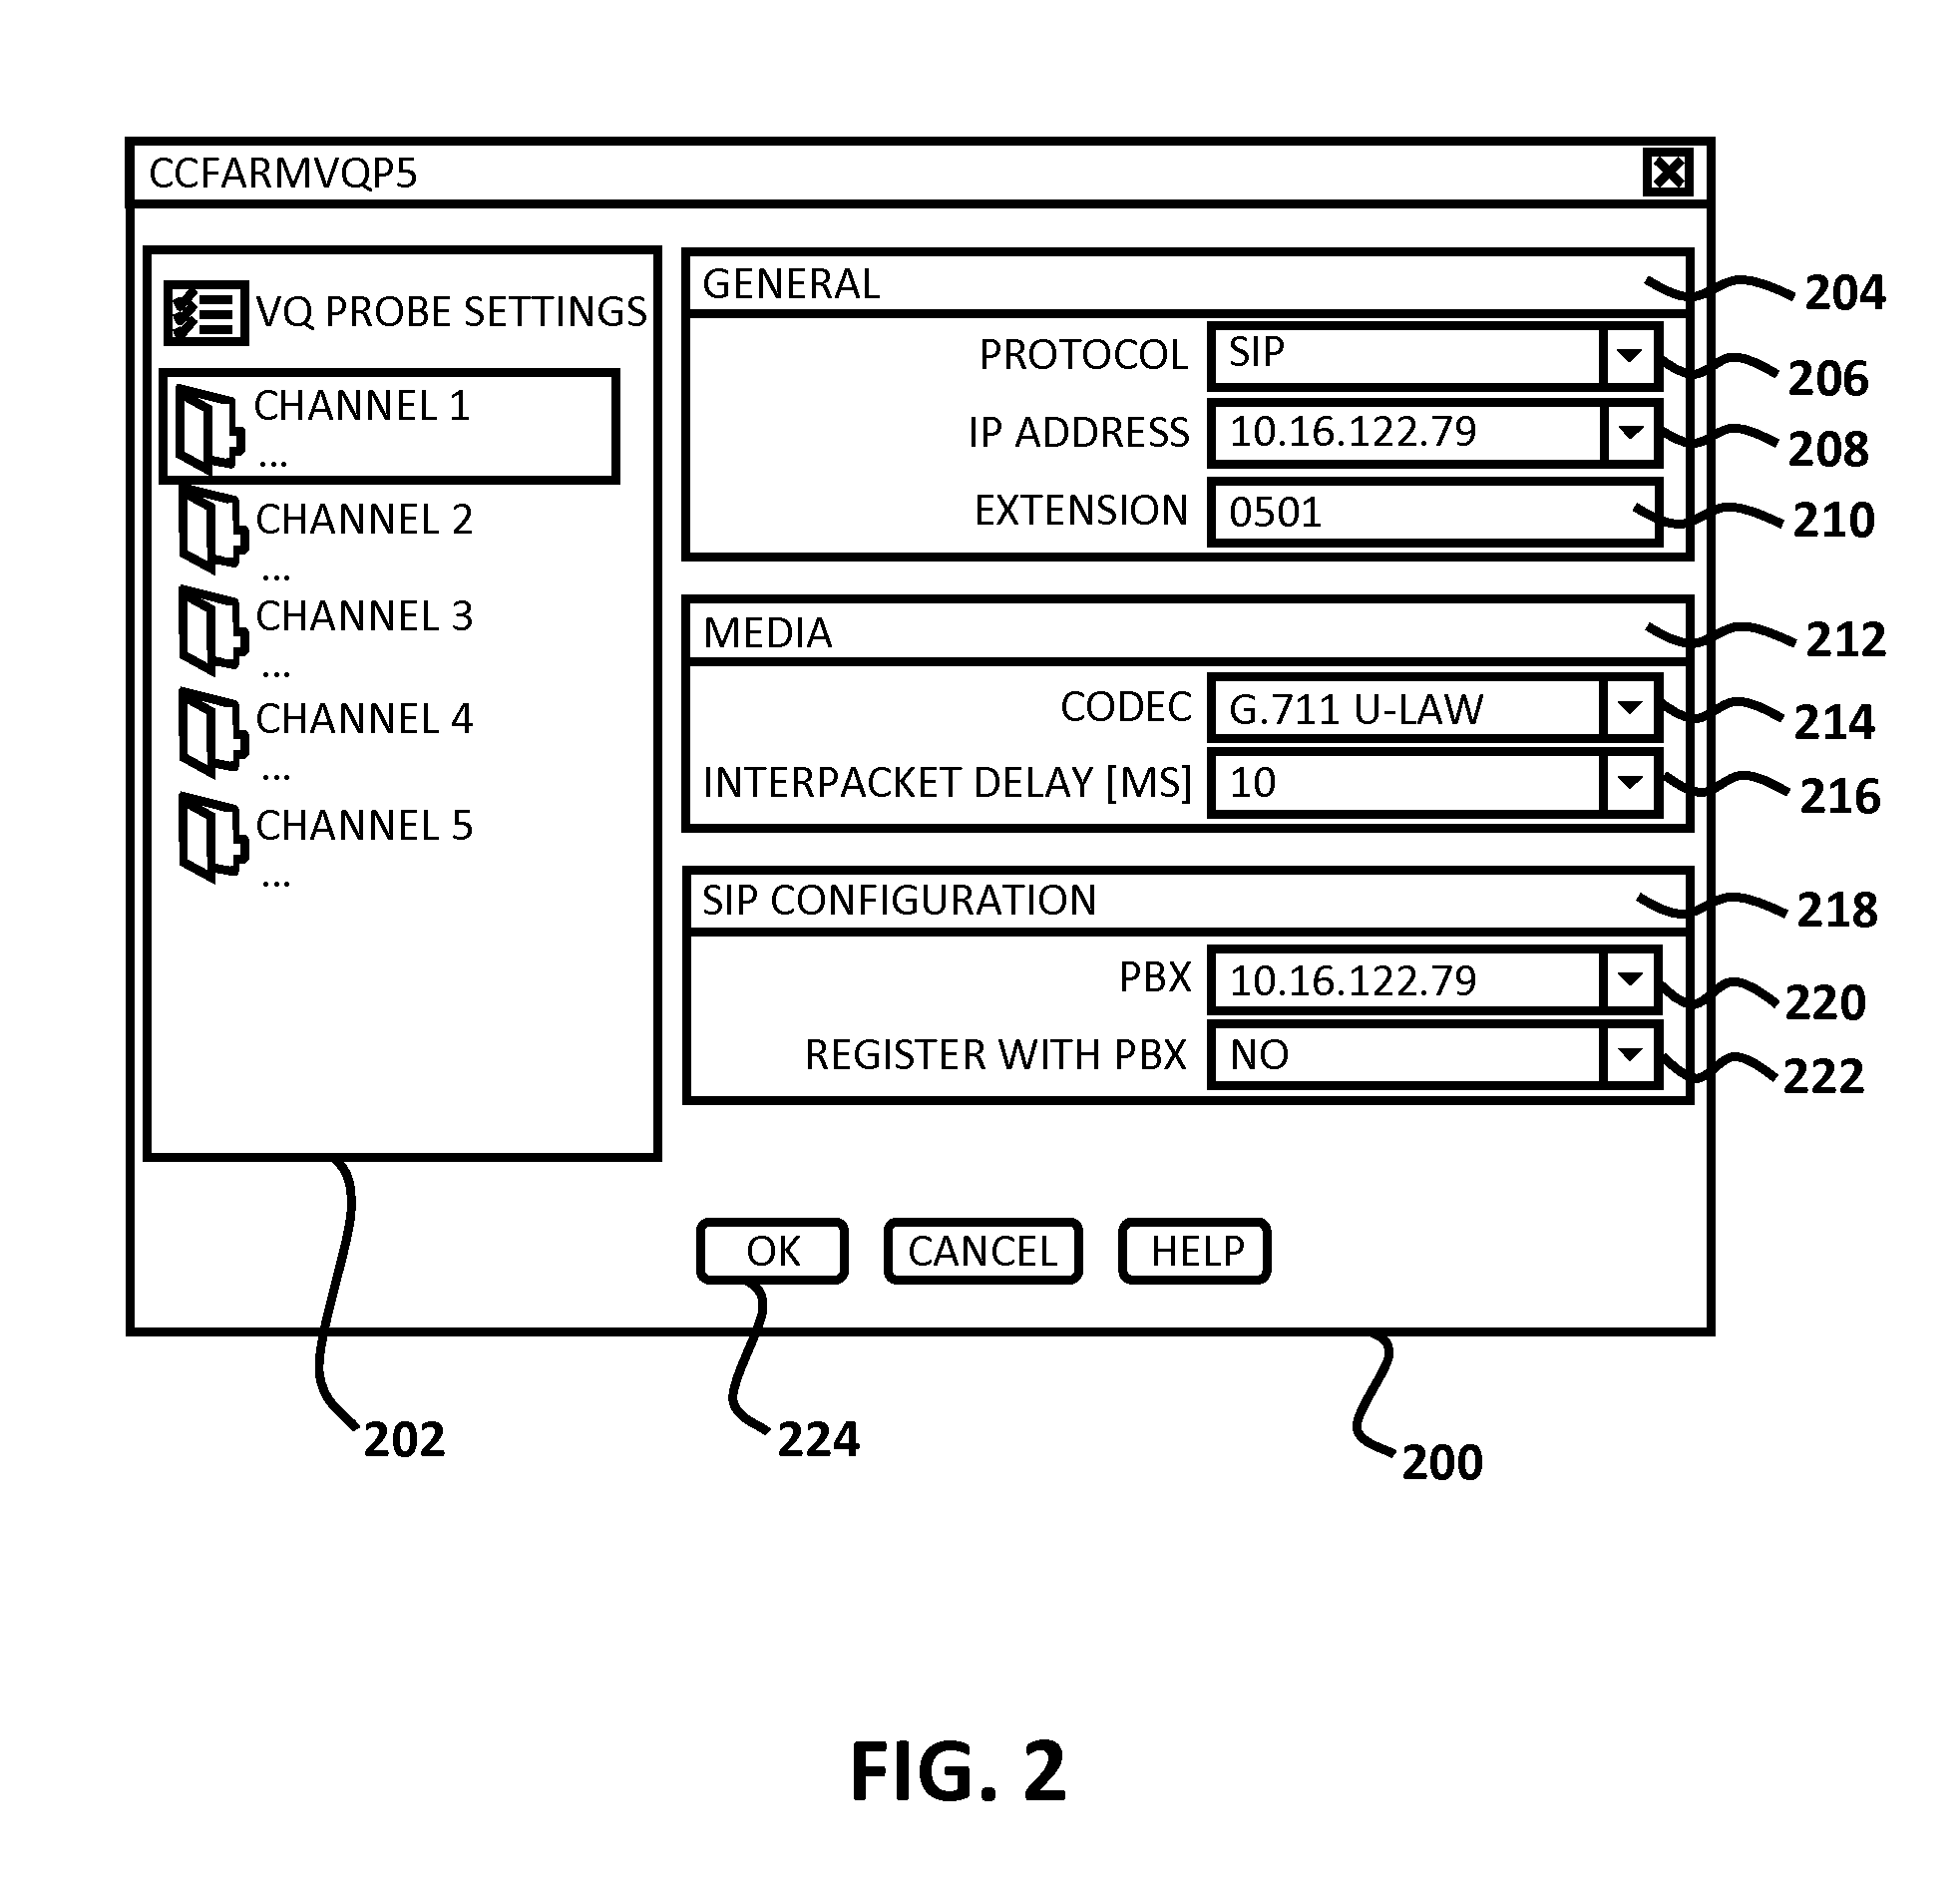 Voice Quality Probe for Communication Networks